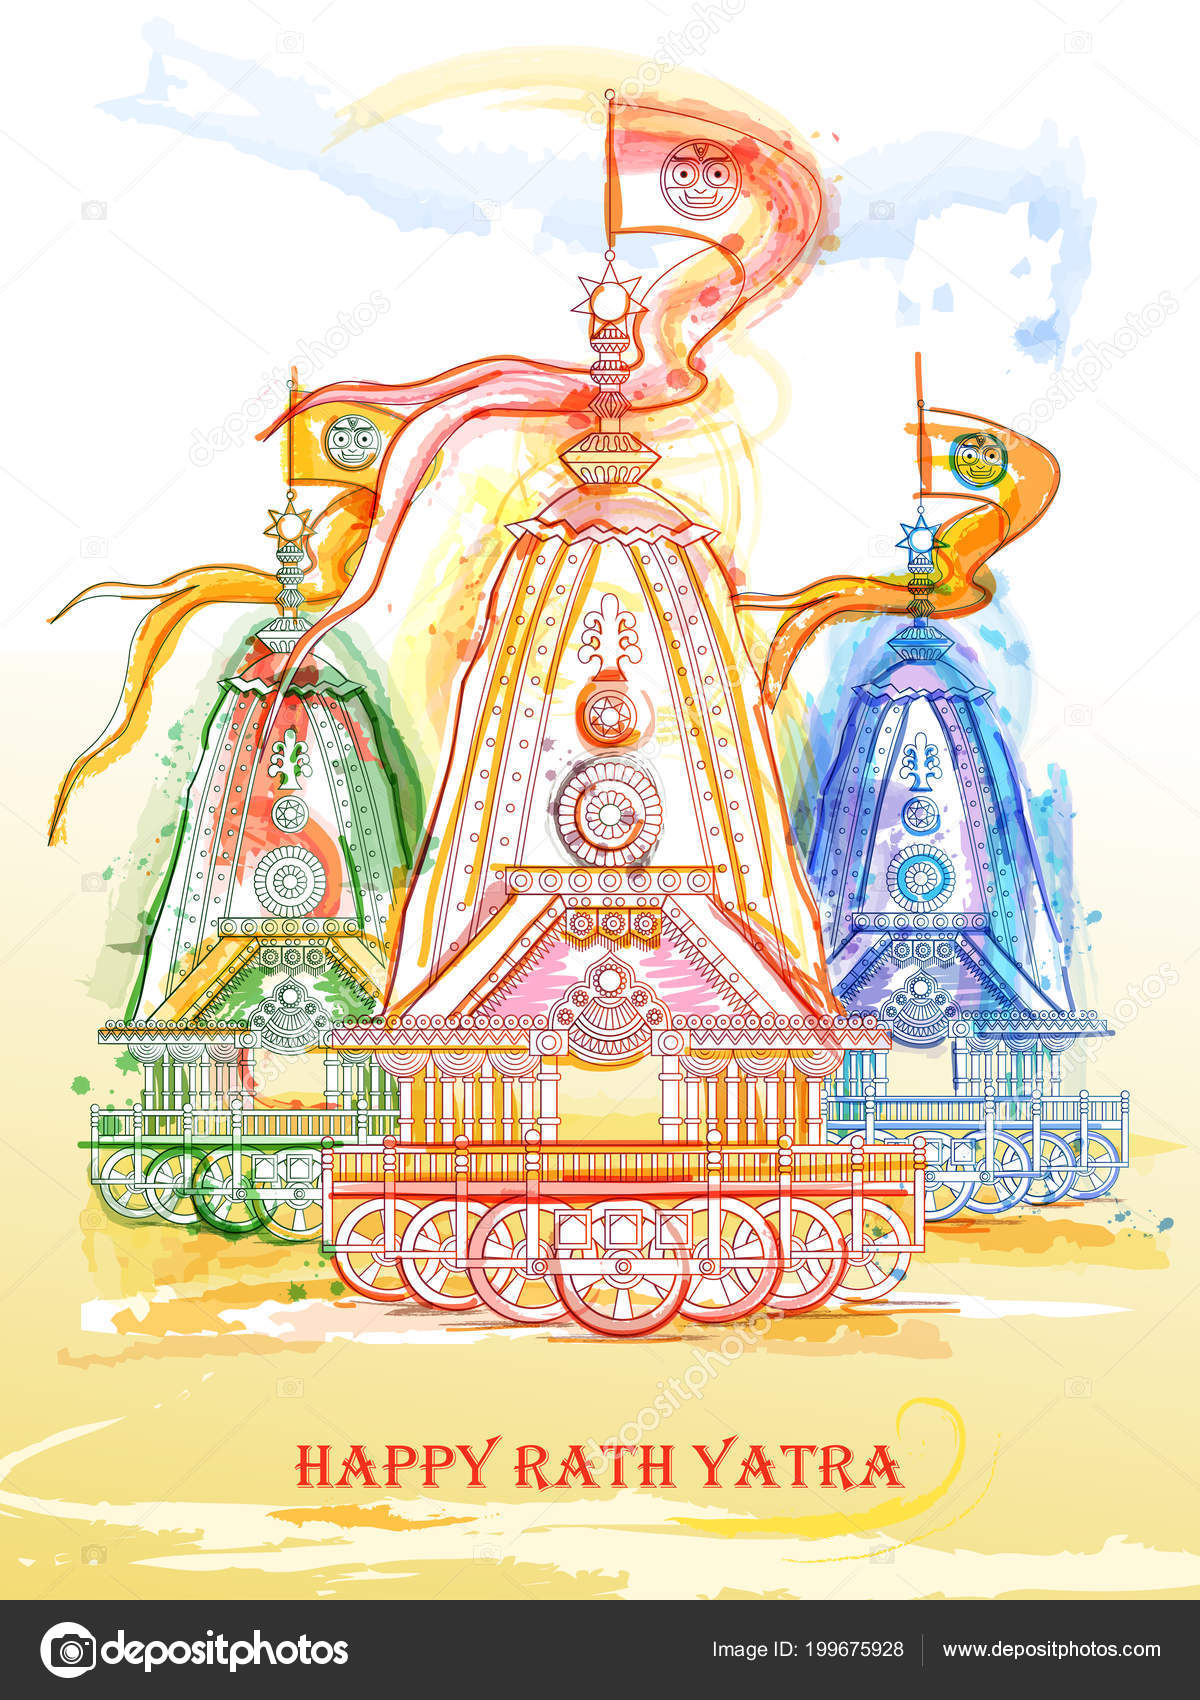 Jagannath Rath Yatra On Hindu Temple Holiday Card Background Free Vector  and graphic 188309599.